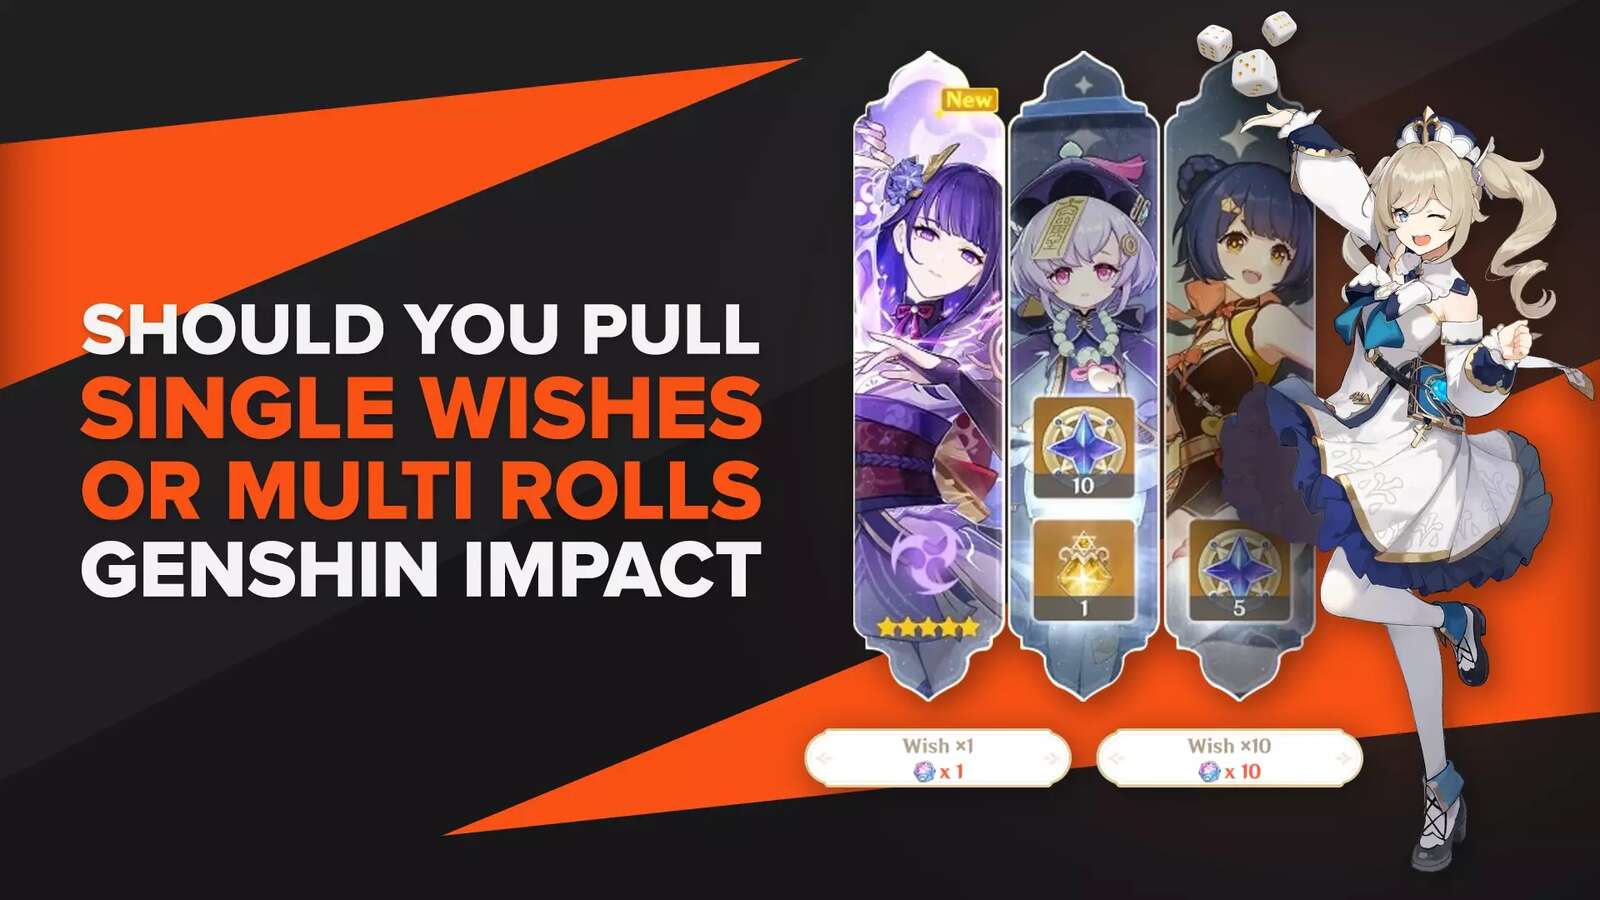 Should You Pull Single Wishes or Multi Rolls? (Explained!)